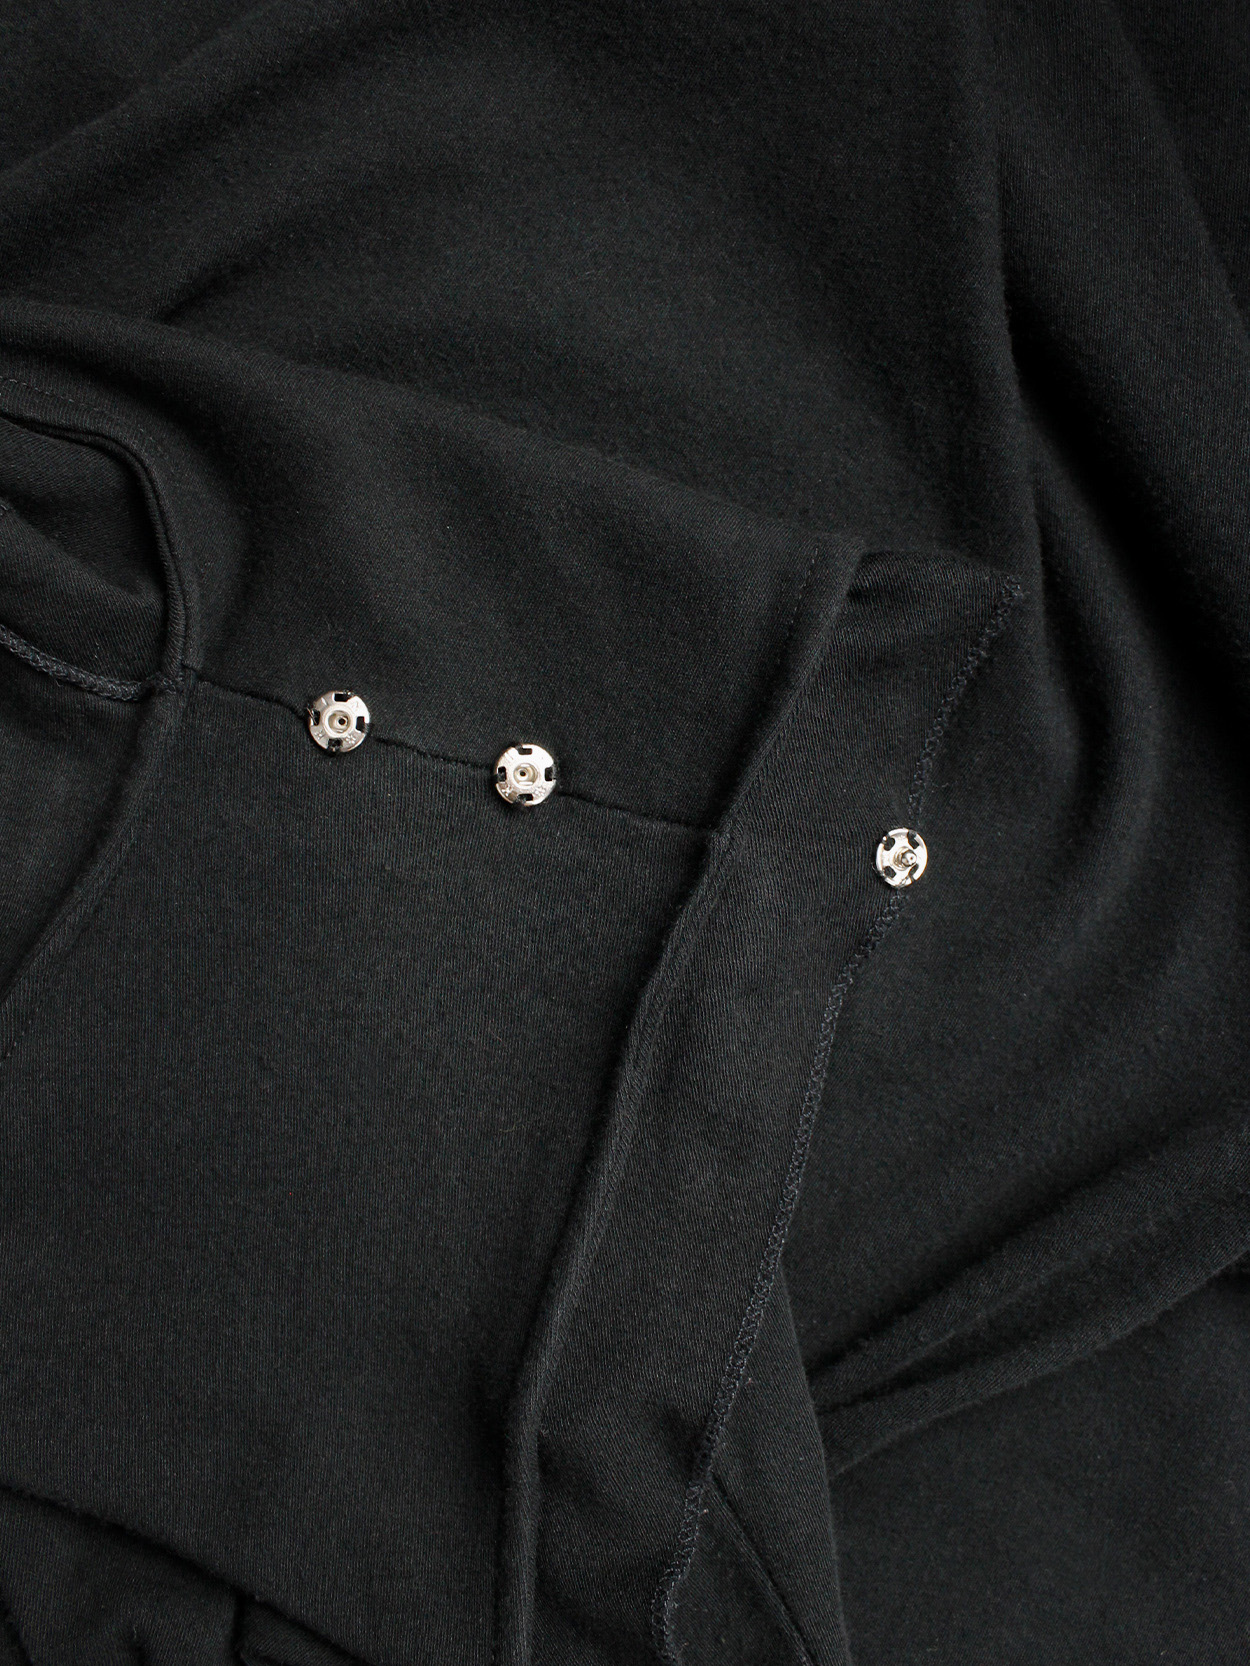 Maison Martin Margiela reproduction of a 1993 black dress with shoulder snap buttons (4)